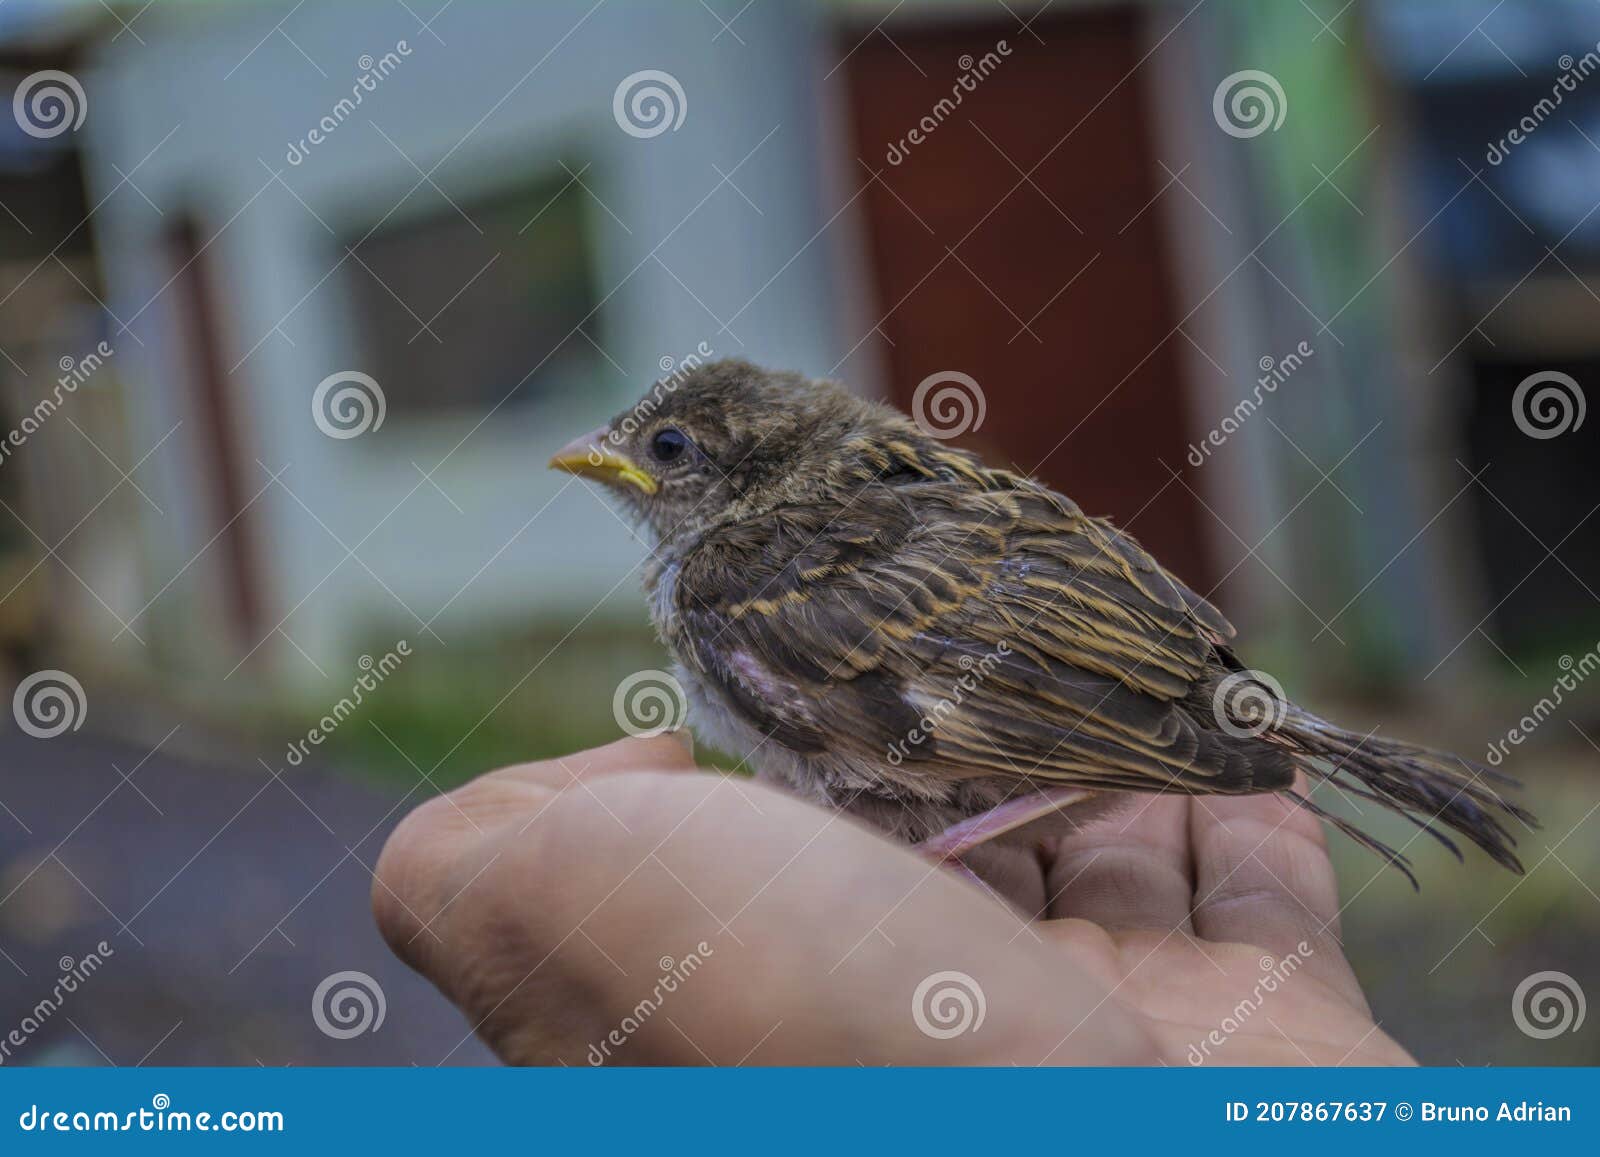 beautiful yellow striped bird in hands with focused background of house in cajola